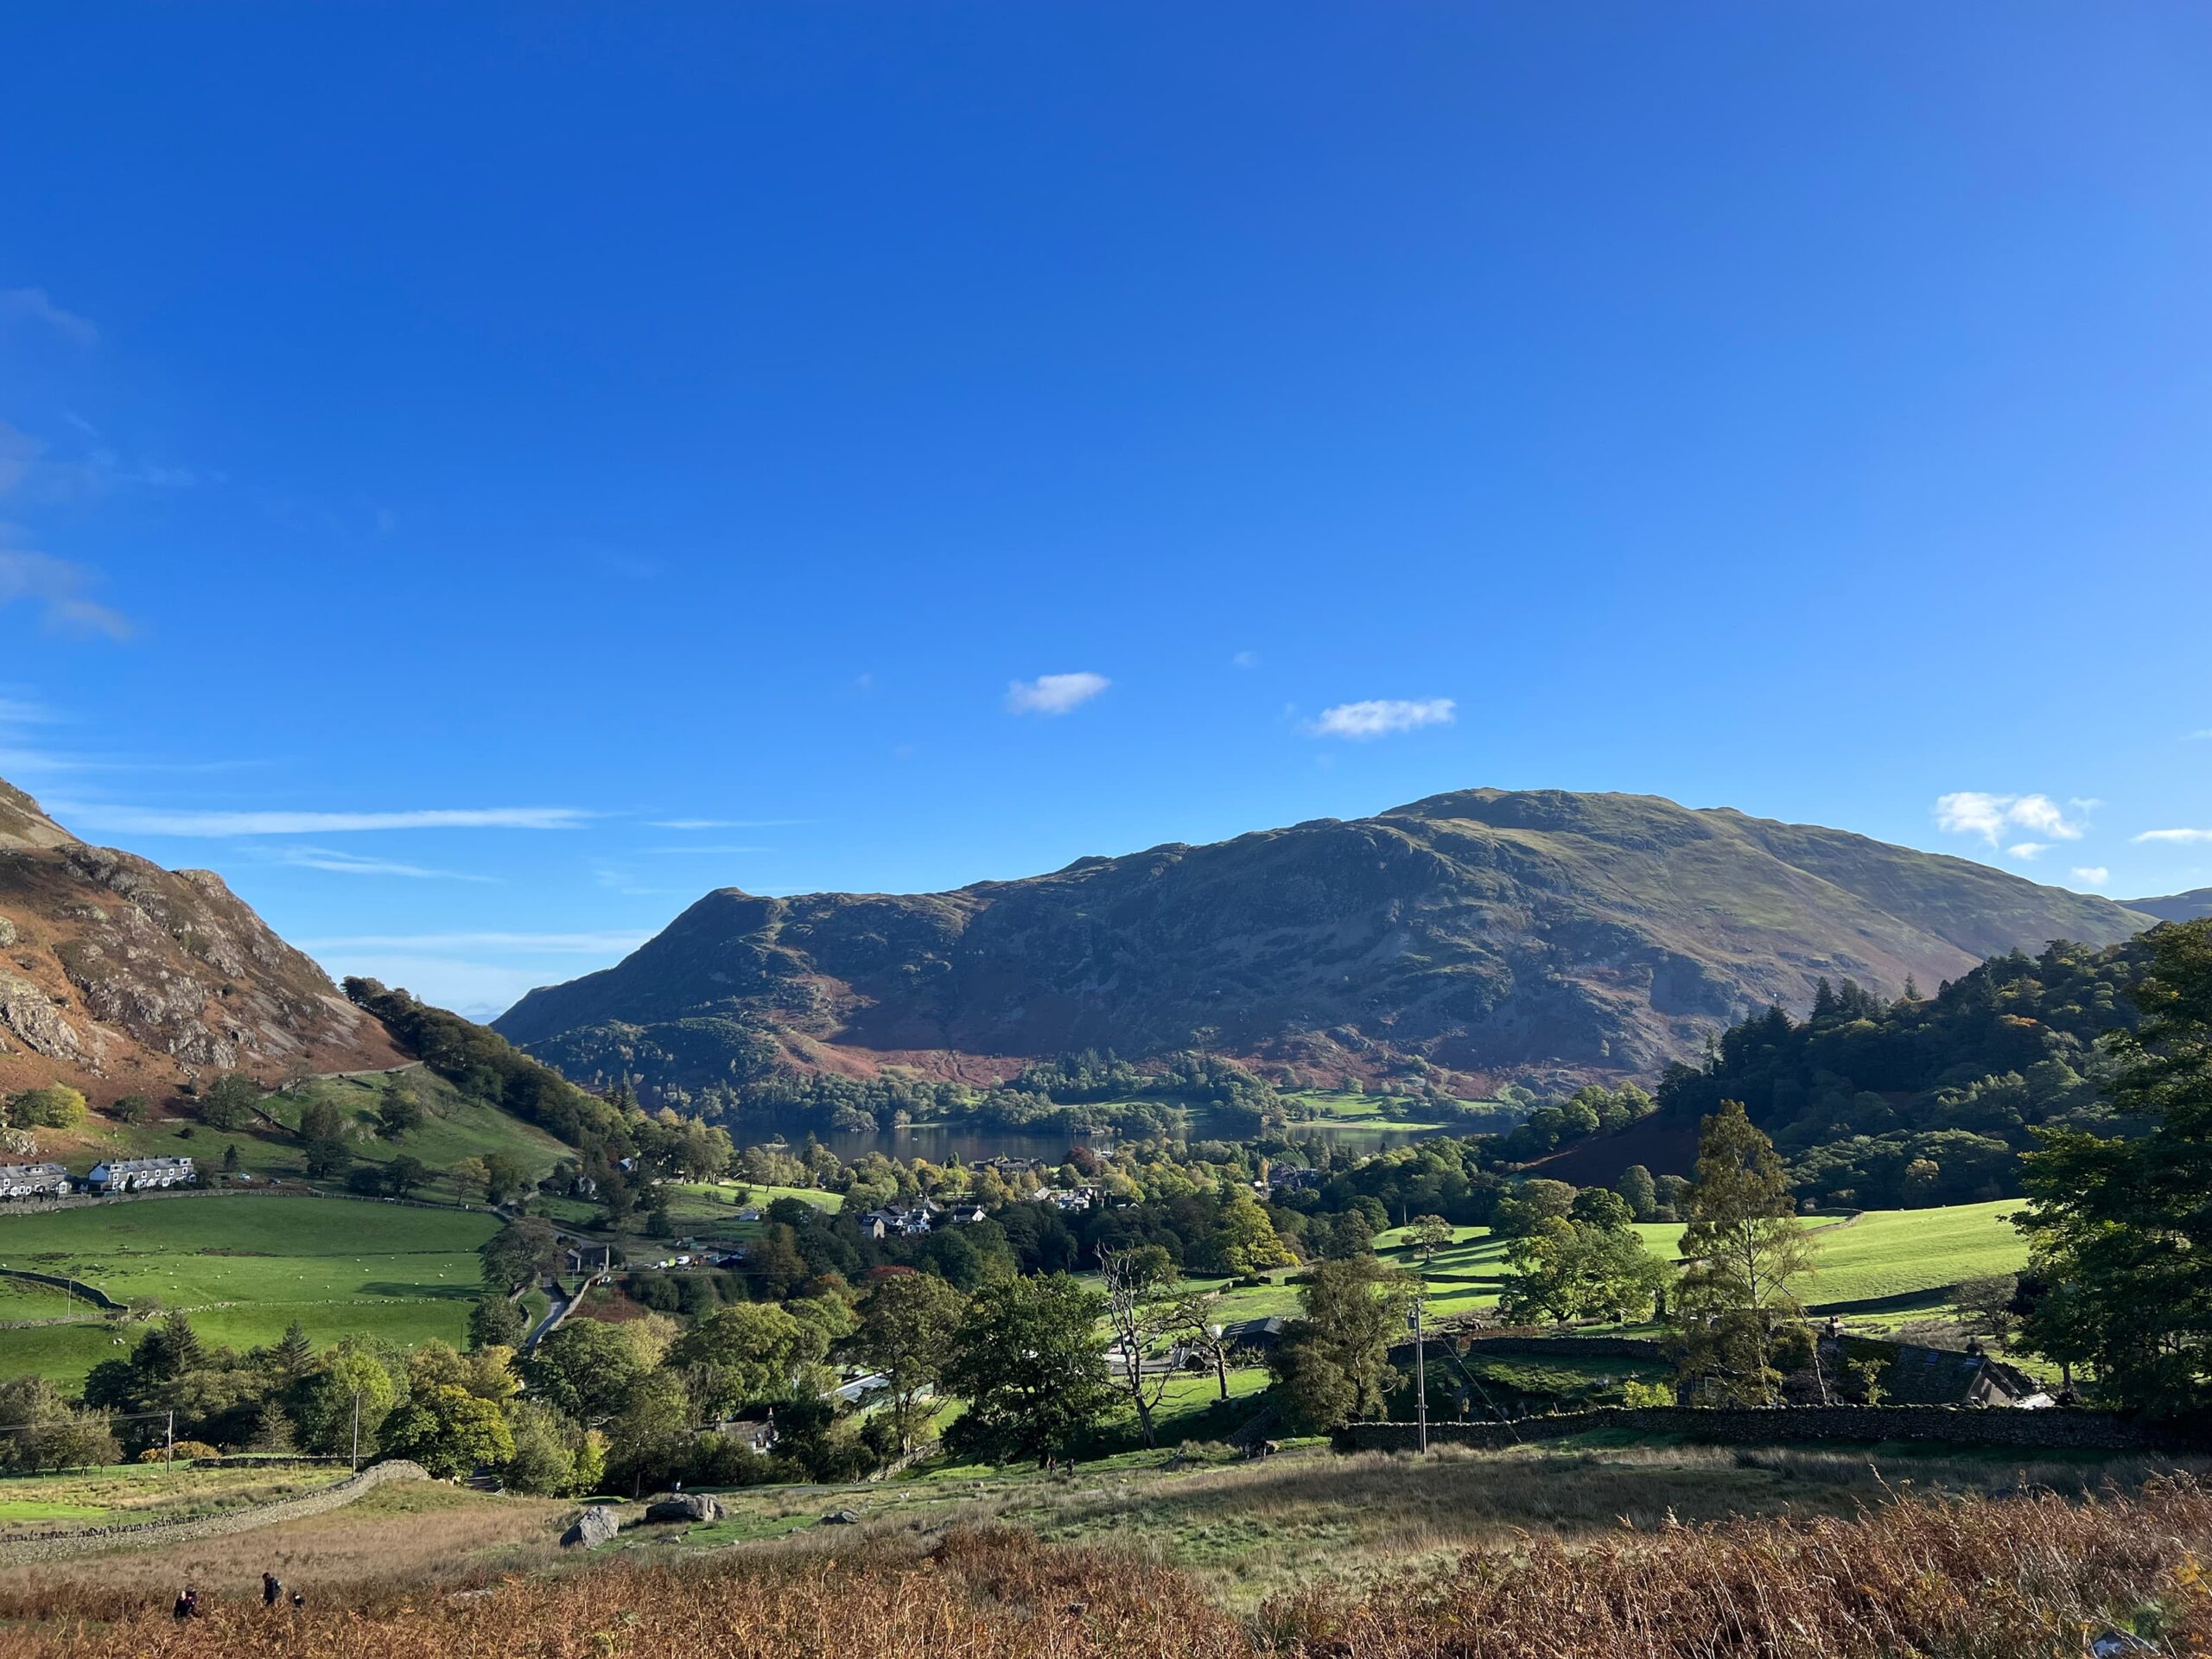 Image midway up Mires beck looking back down at the village of Glenridding. You can see Ullswater beginning to appear in the distance. The sky is blue. 